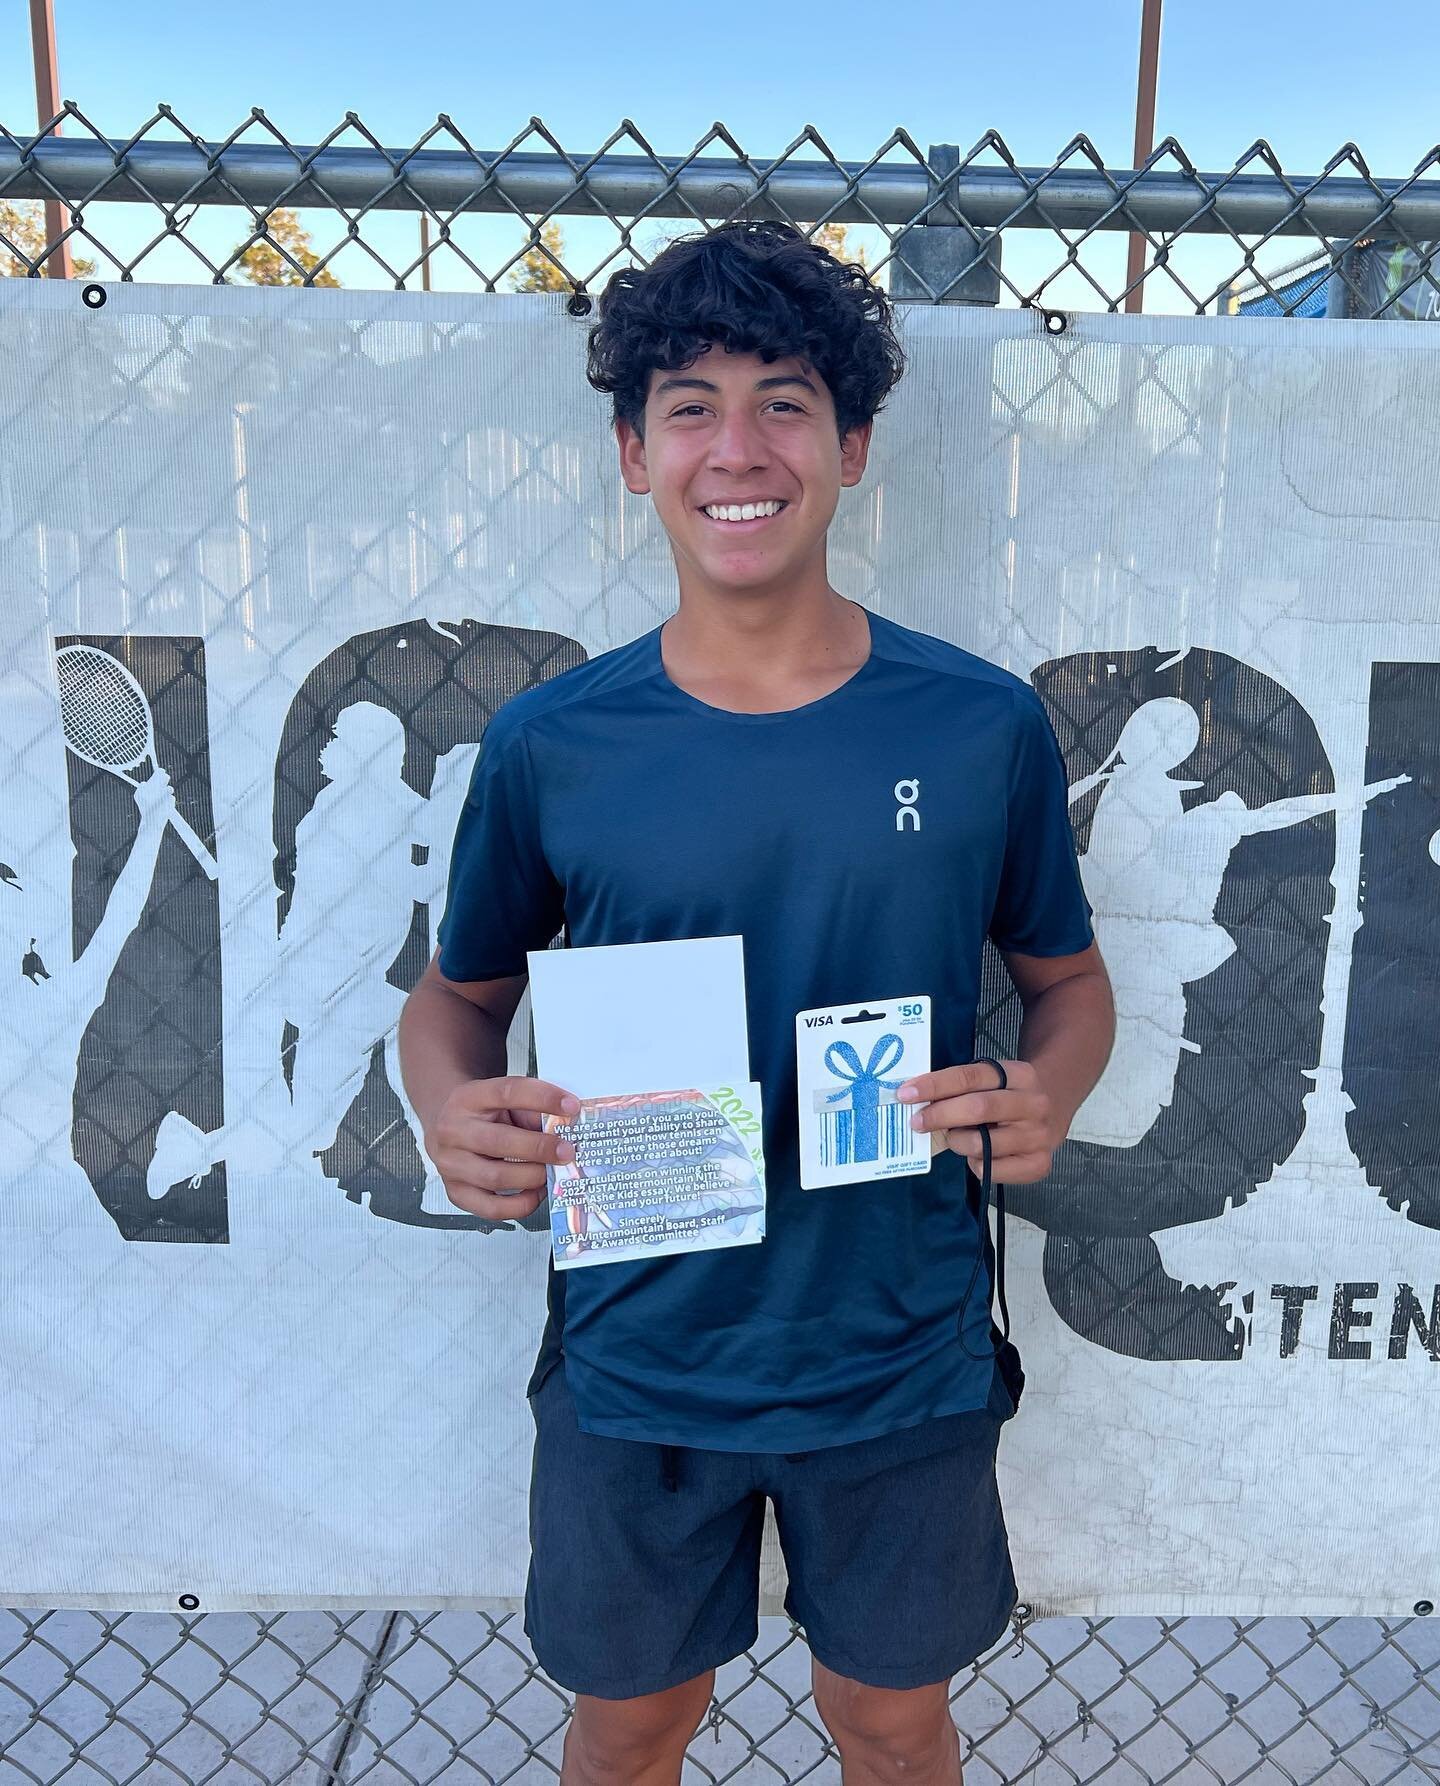 Talented not only with a racquet, but also with a pen! HUGE congratulations to the following NO QUIT &amp; TEAM BRYAN players for placing in the USTA&rsquo;s Arthur Ashe Essay Contest!

Samuel Battistone
Jeselle Ante
Ianmarco Millet
Allison Hernandez